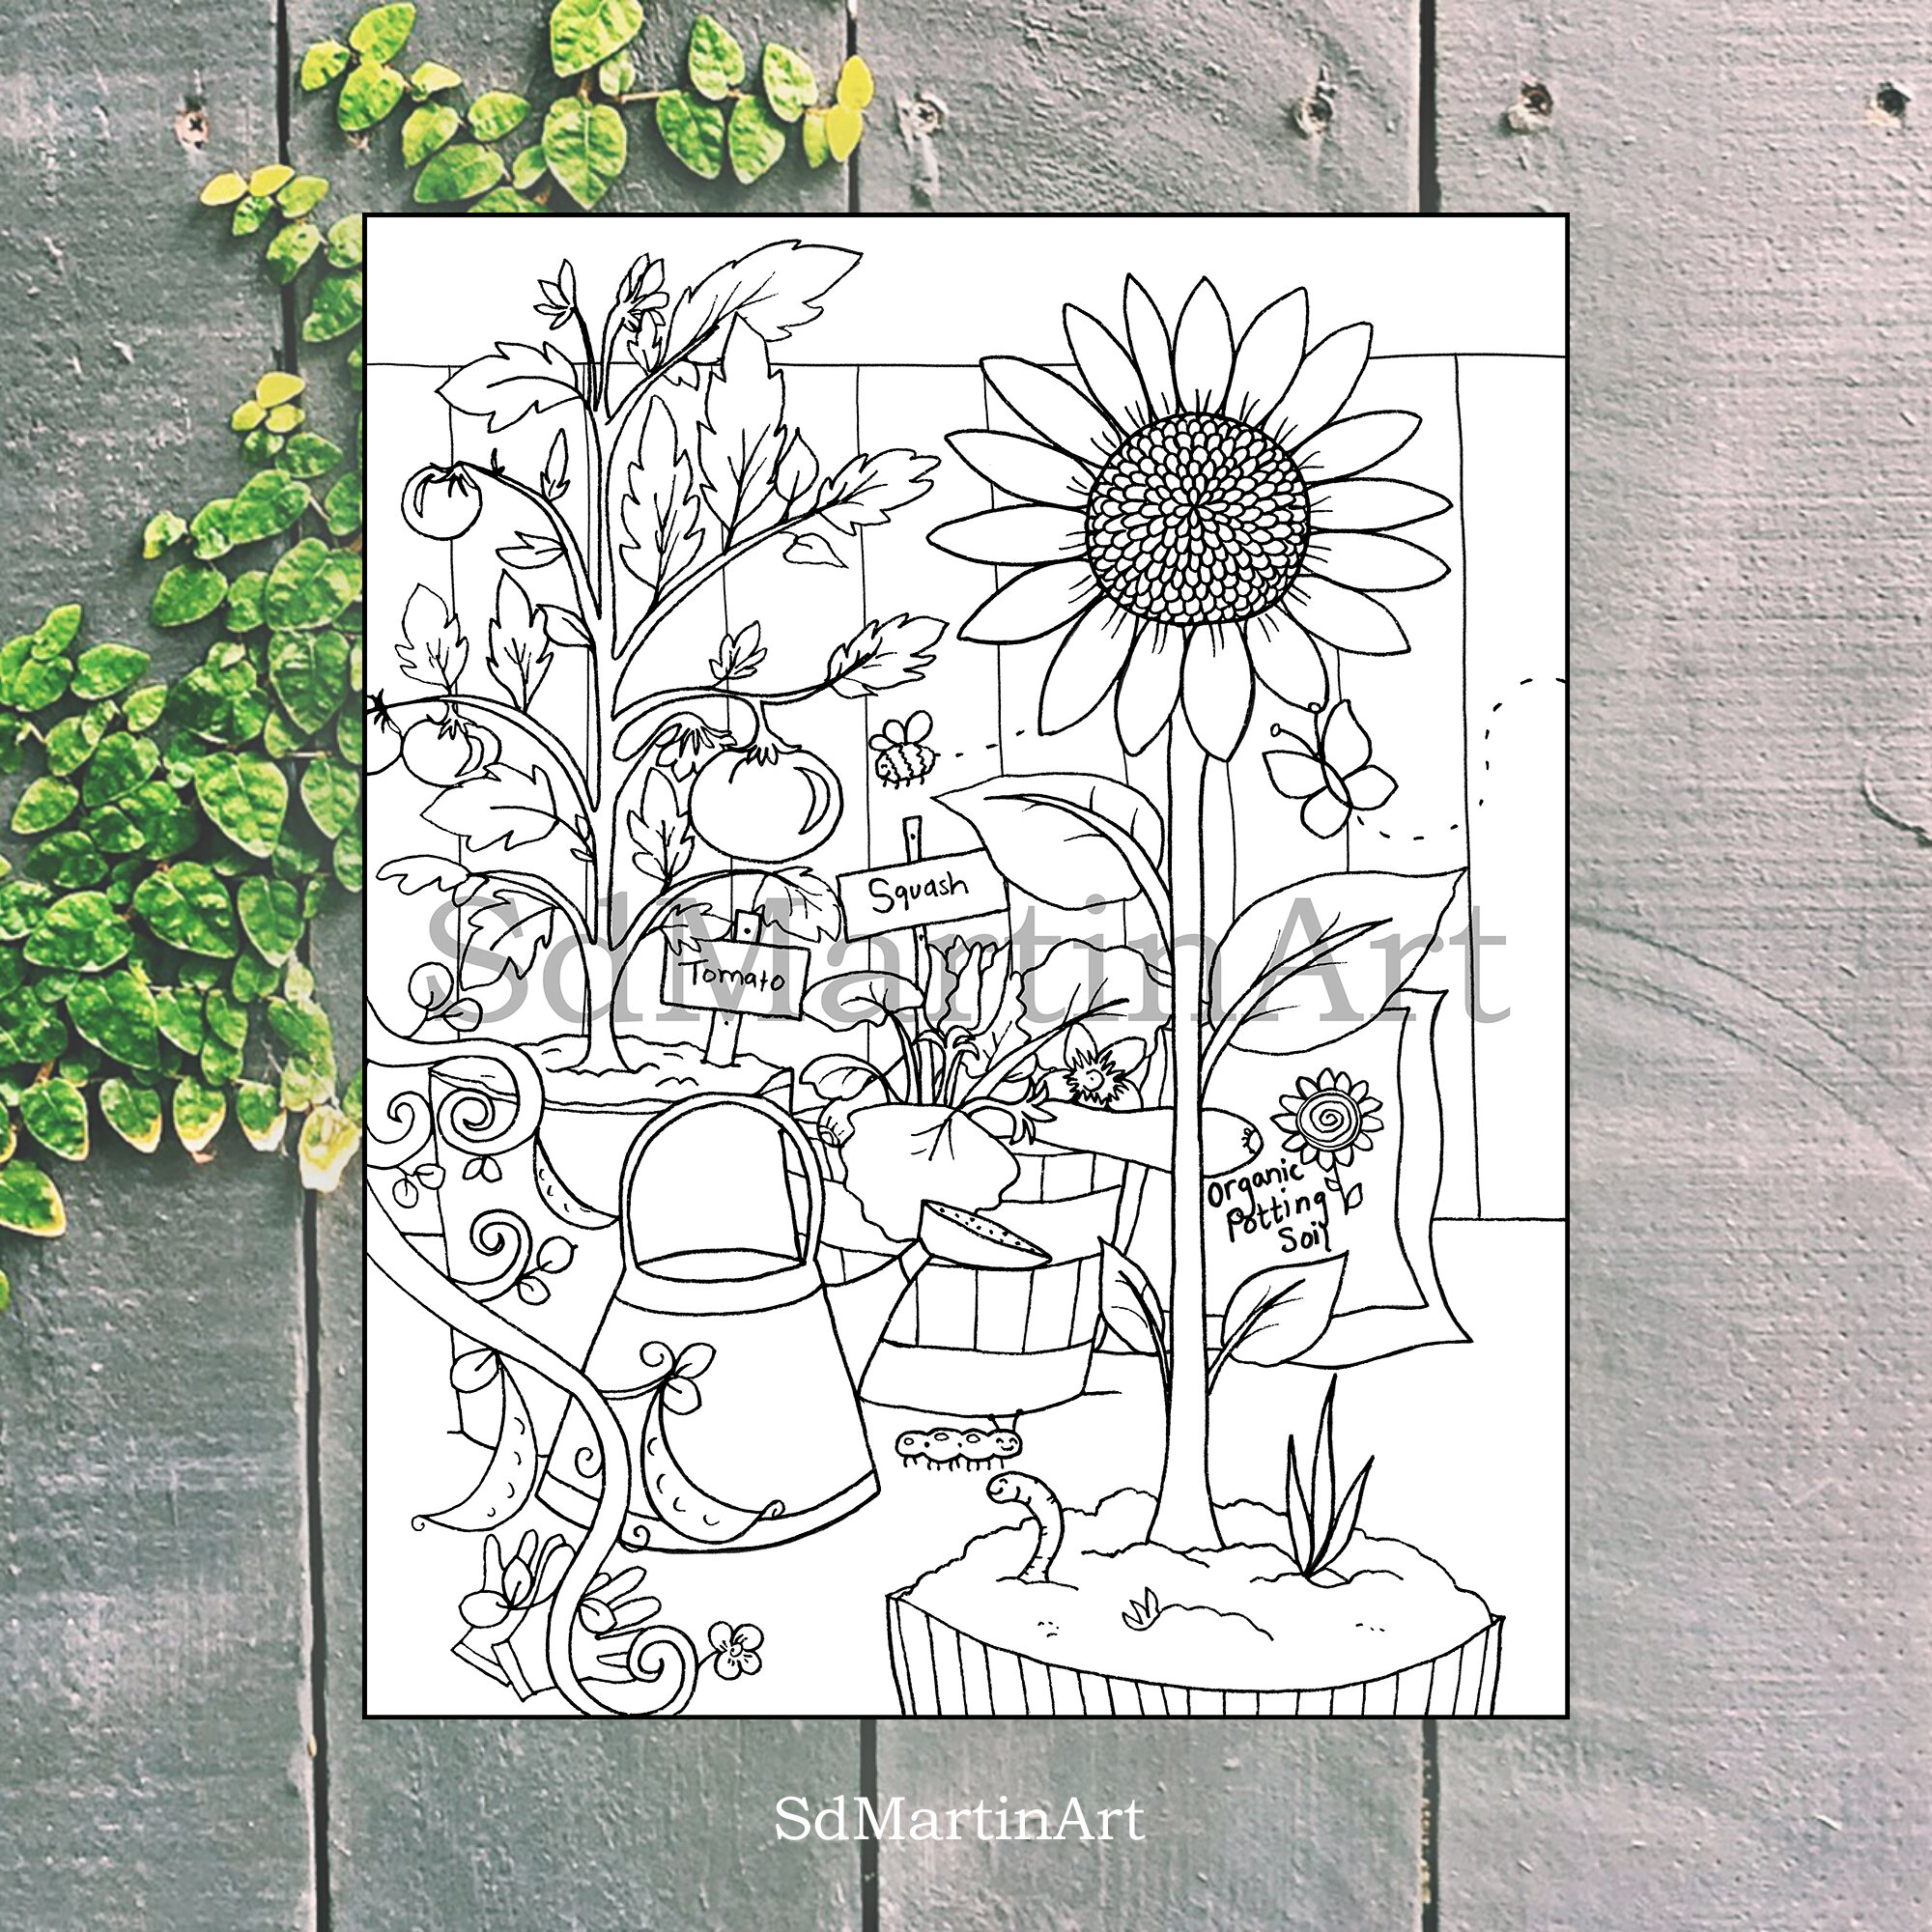 SdMartinArt_Lovely Container Garden_Coloring Page_NEW Canva PRVW IMG with WM.jpg